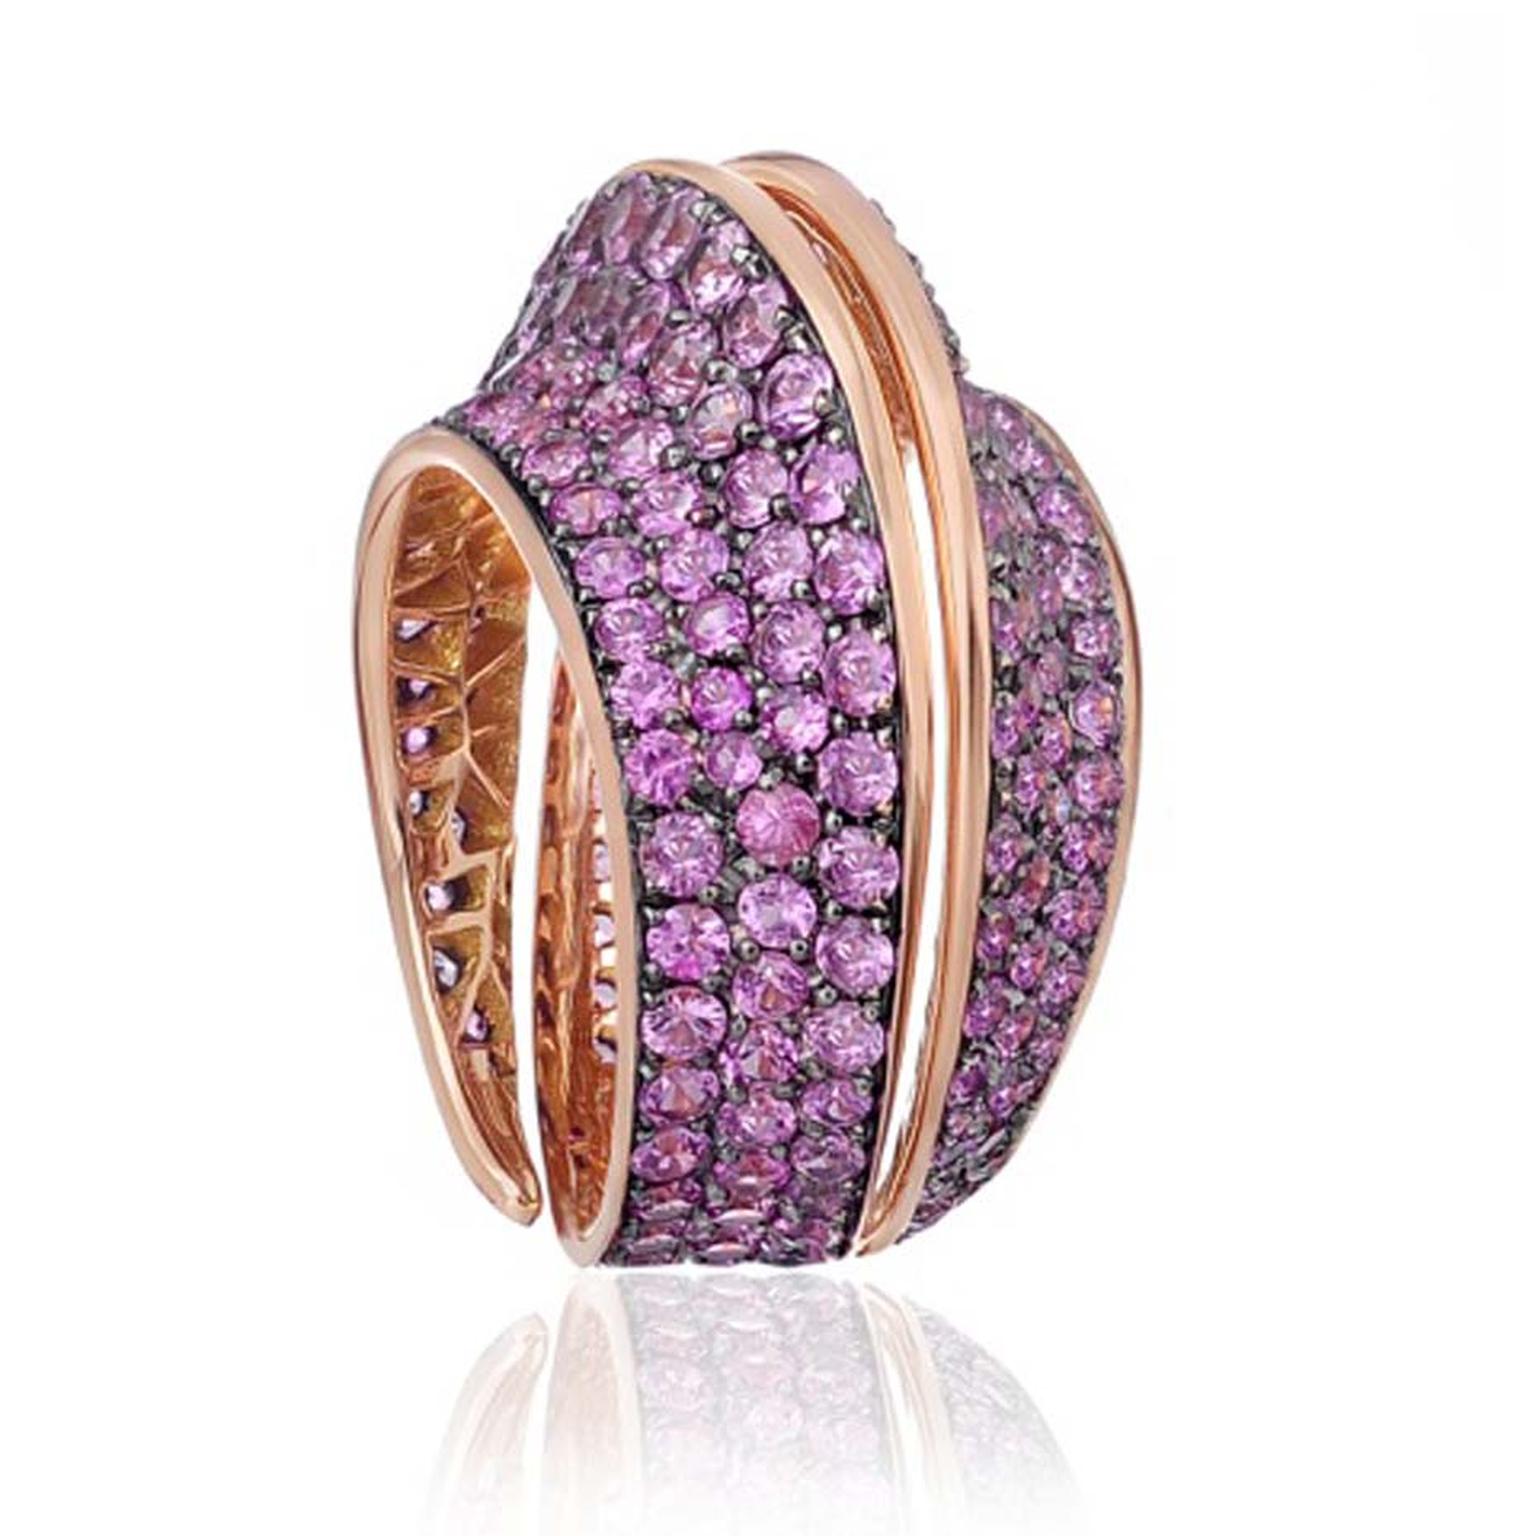 Lily Gabriella ring in rose gold, pavé set with pink sapphires.